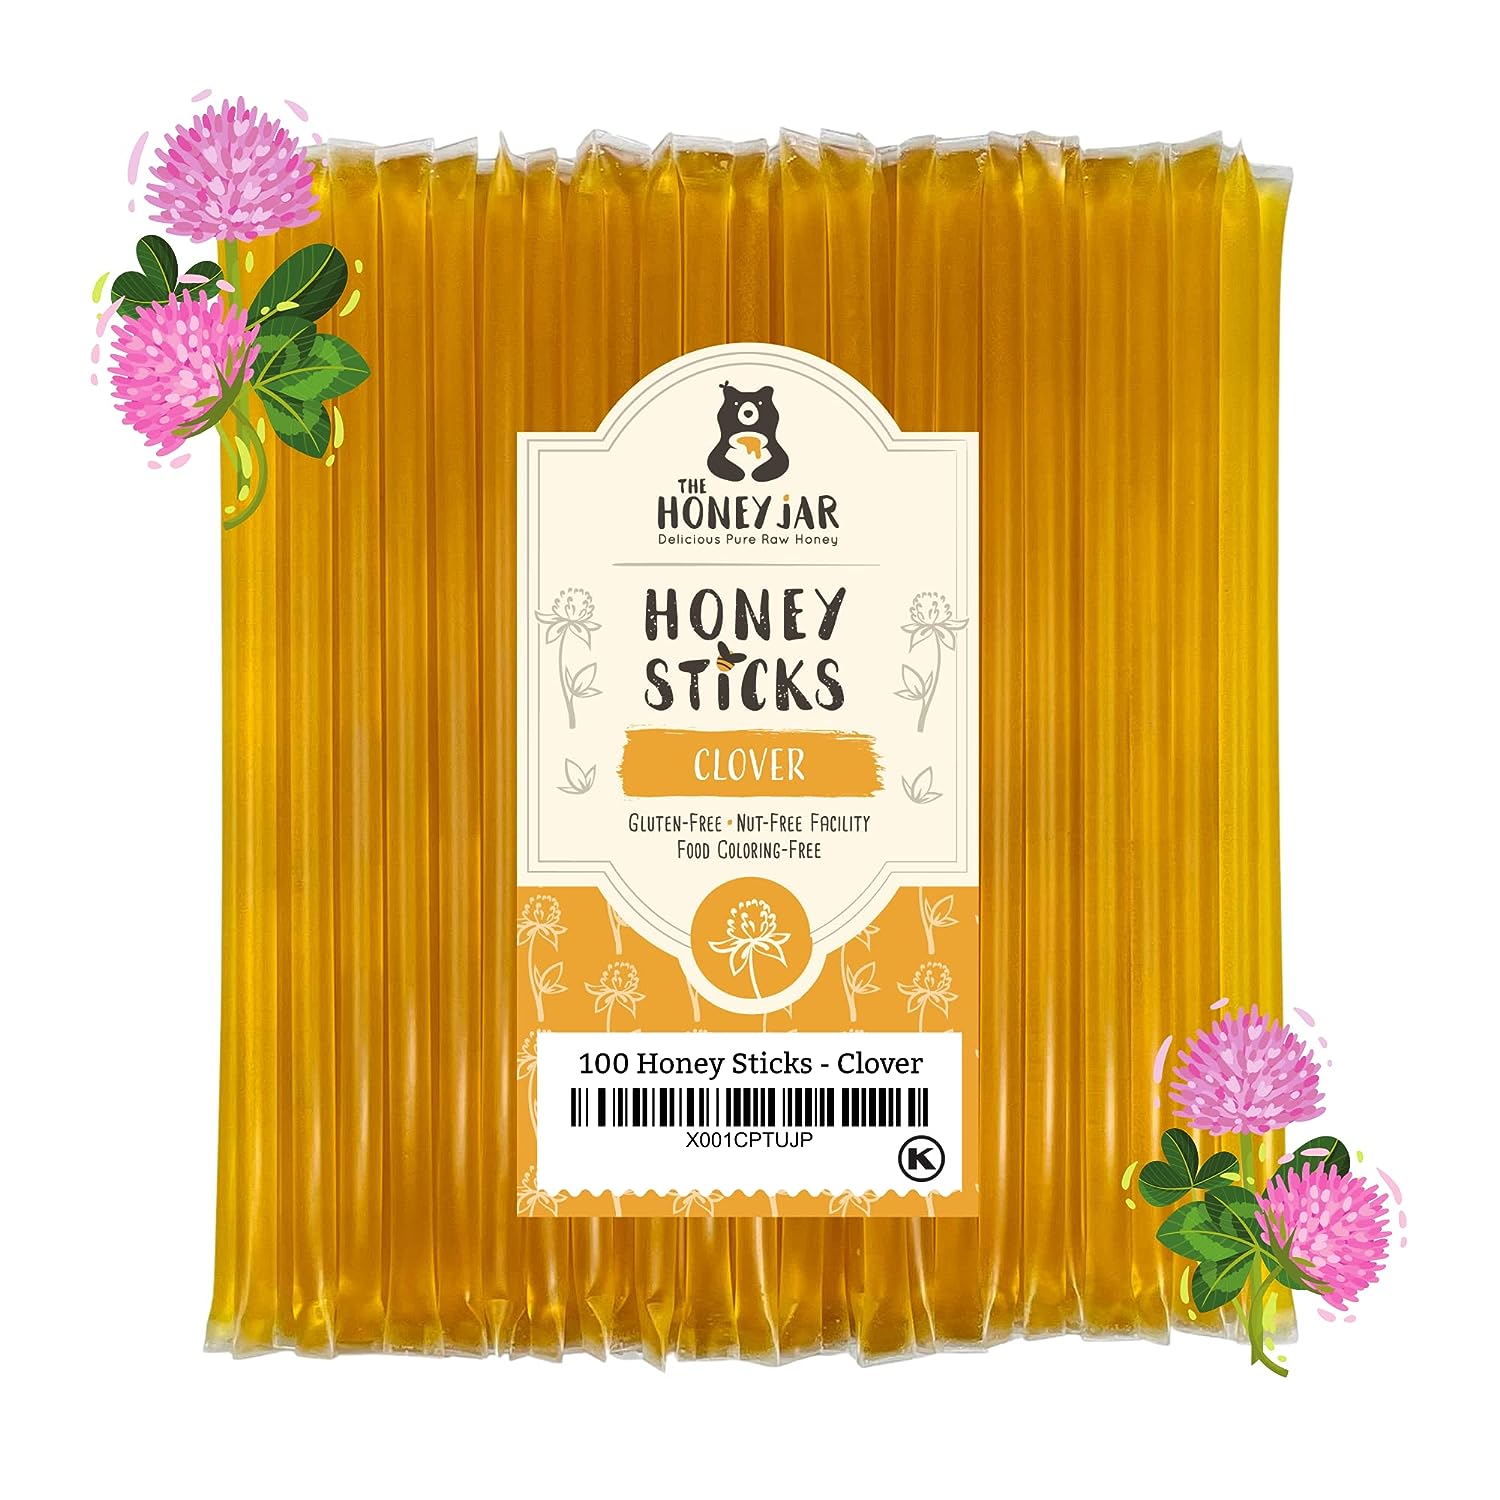 The Honey Jar Plain Raw Sticks - Pure Straws For Tea, Coffee, or a Healthy Treat - One Teaspoon of Flavored Honey Per Stick - Made In The USA with Real Honey - (100 Count)